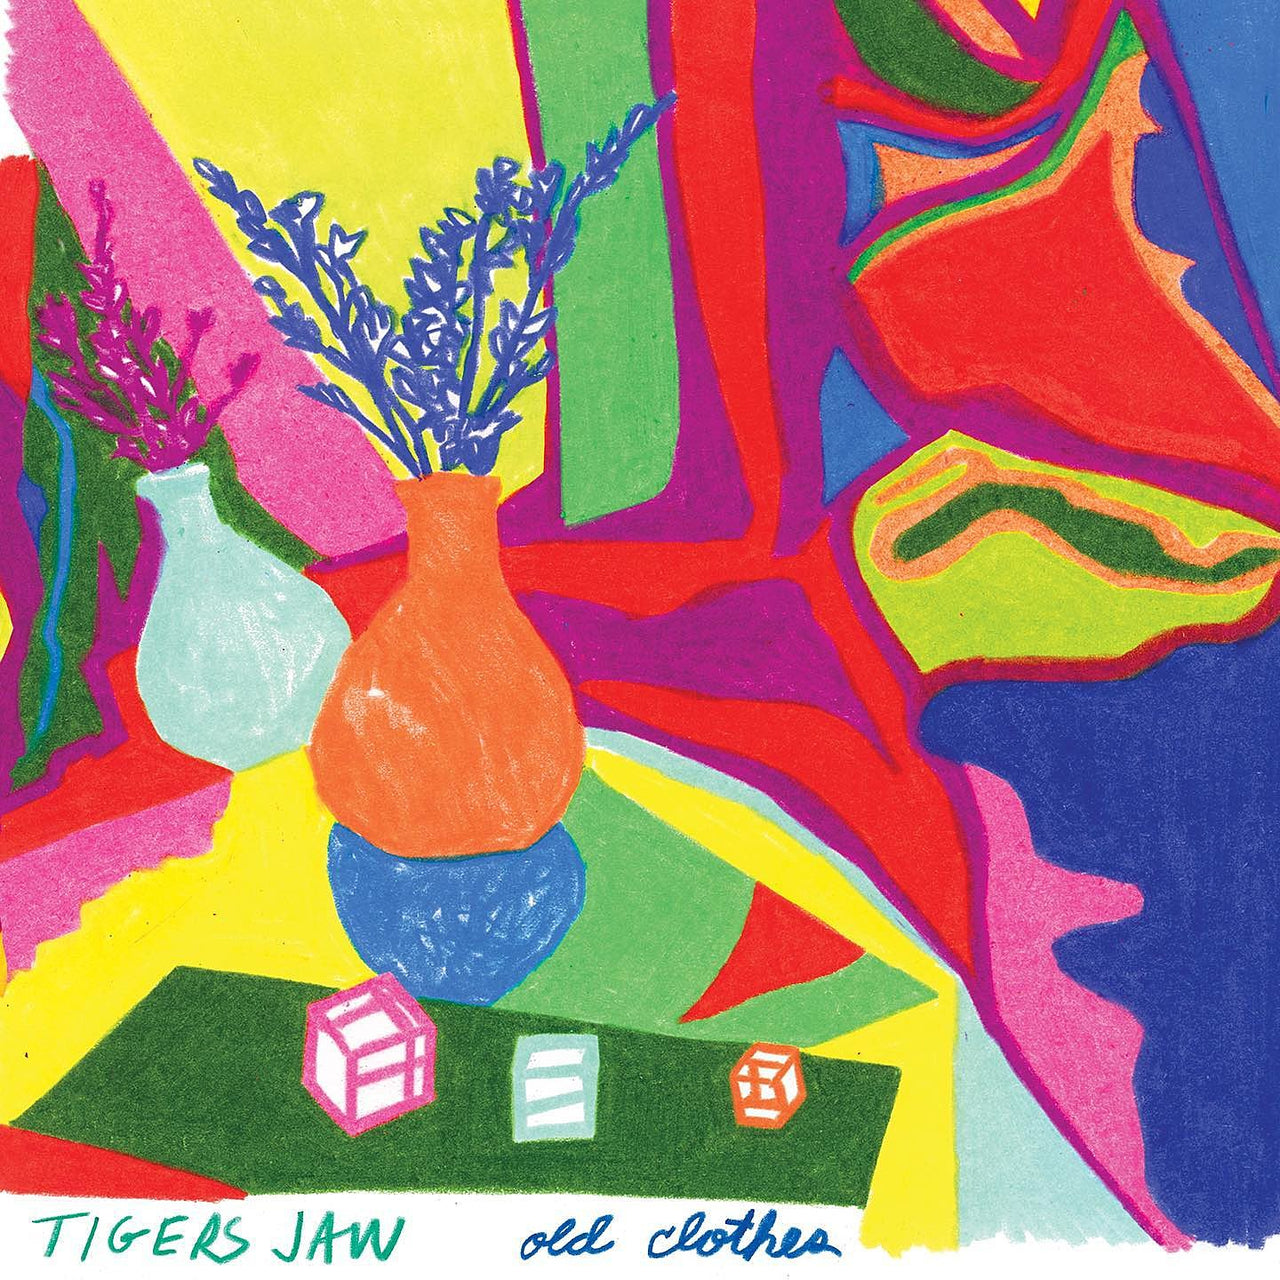 Tigers Jaw "Old Clothes" 7" Vinyl